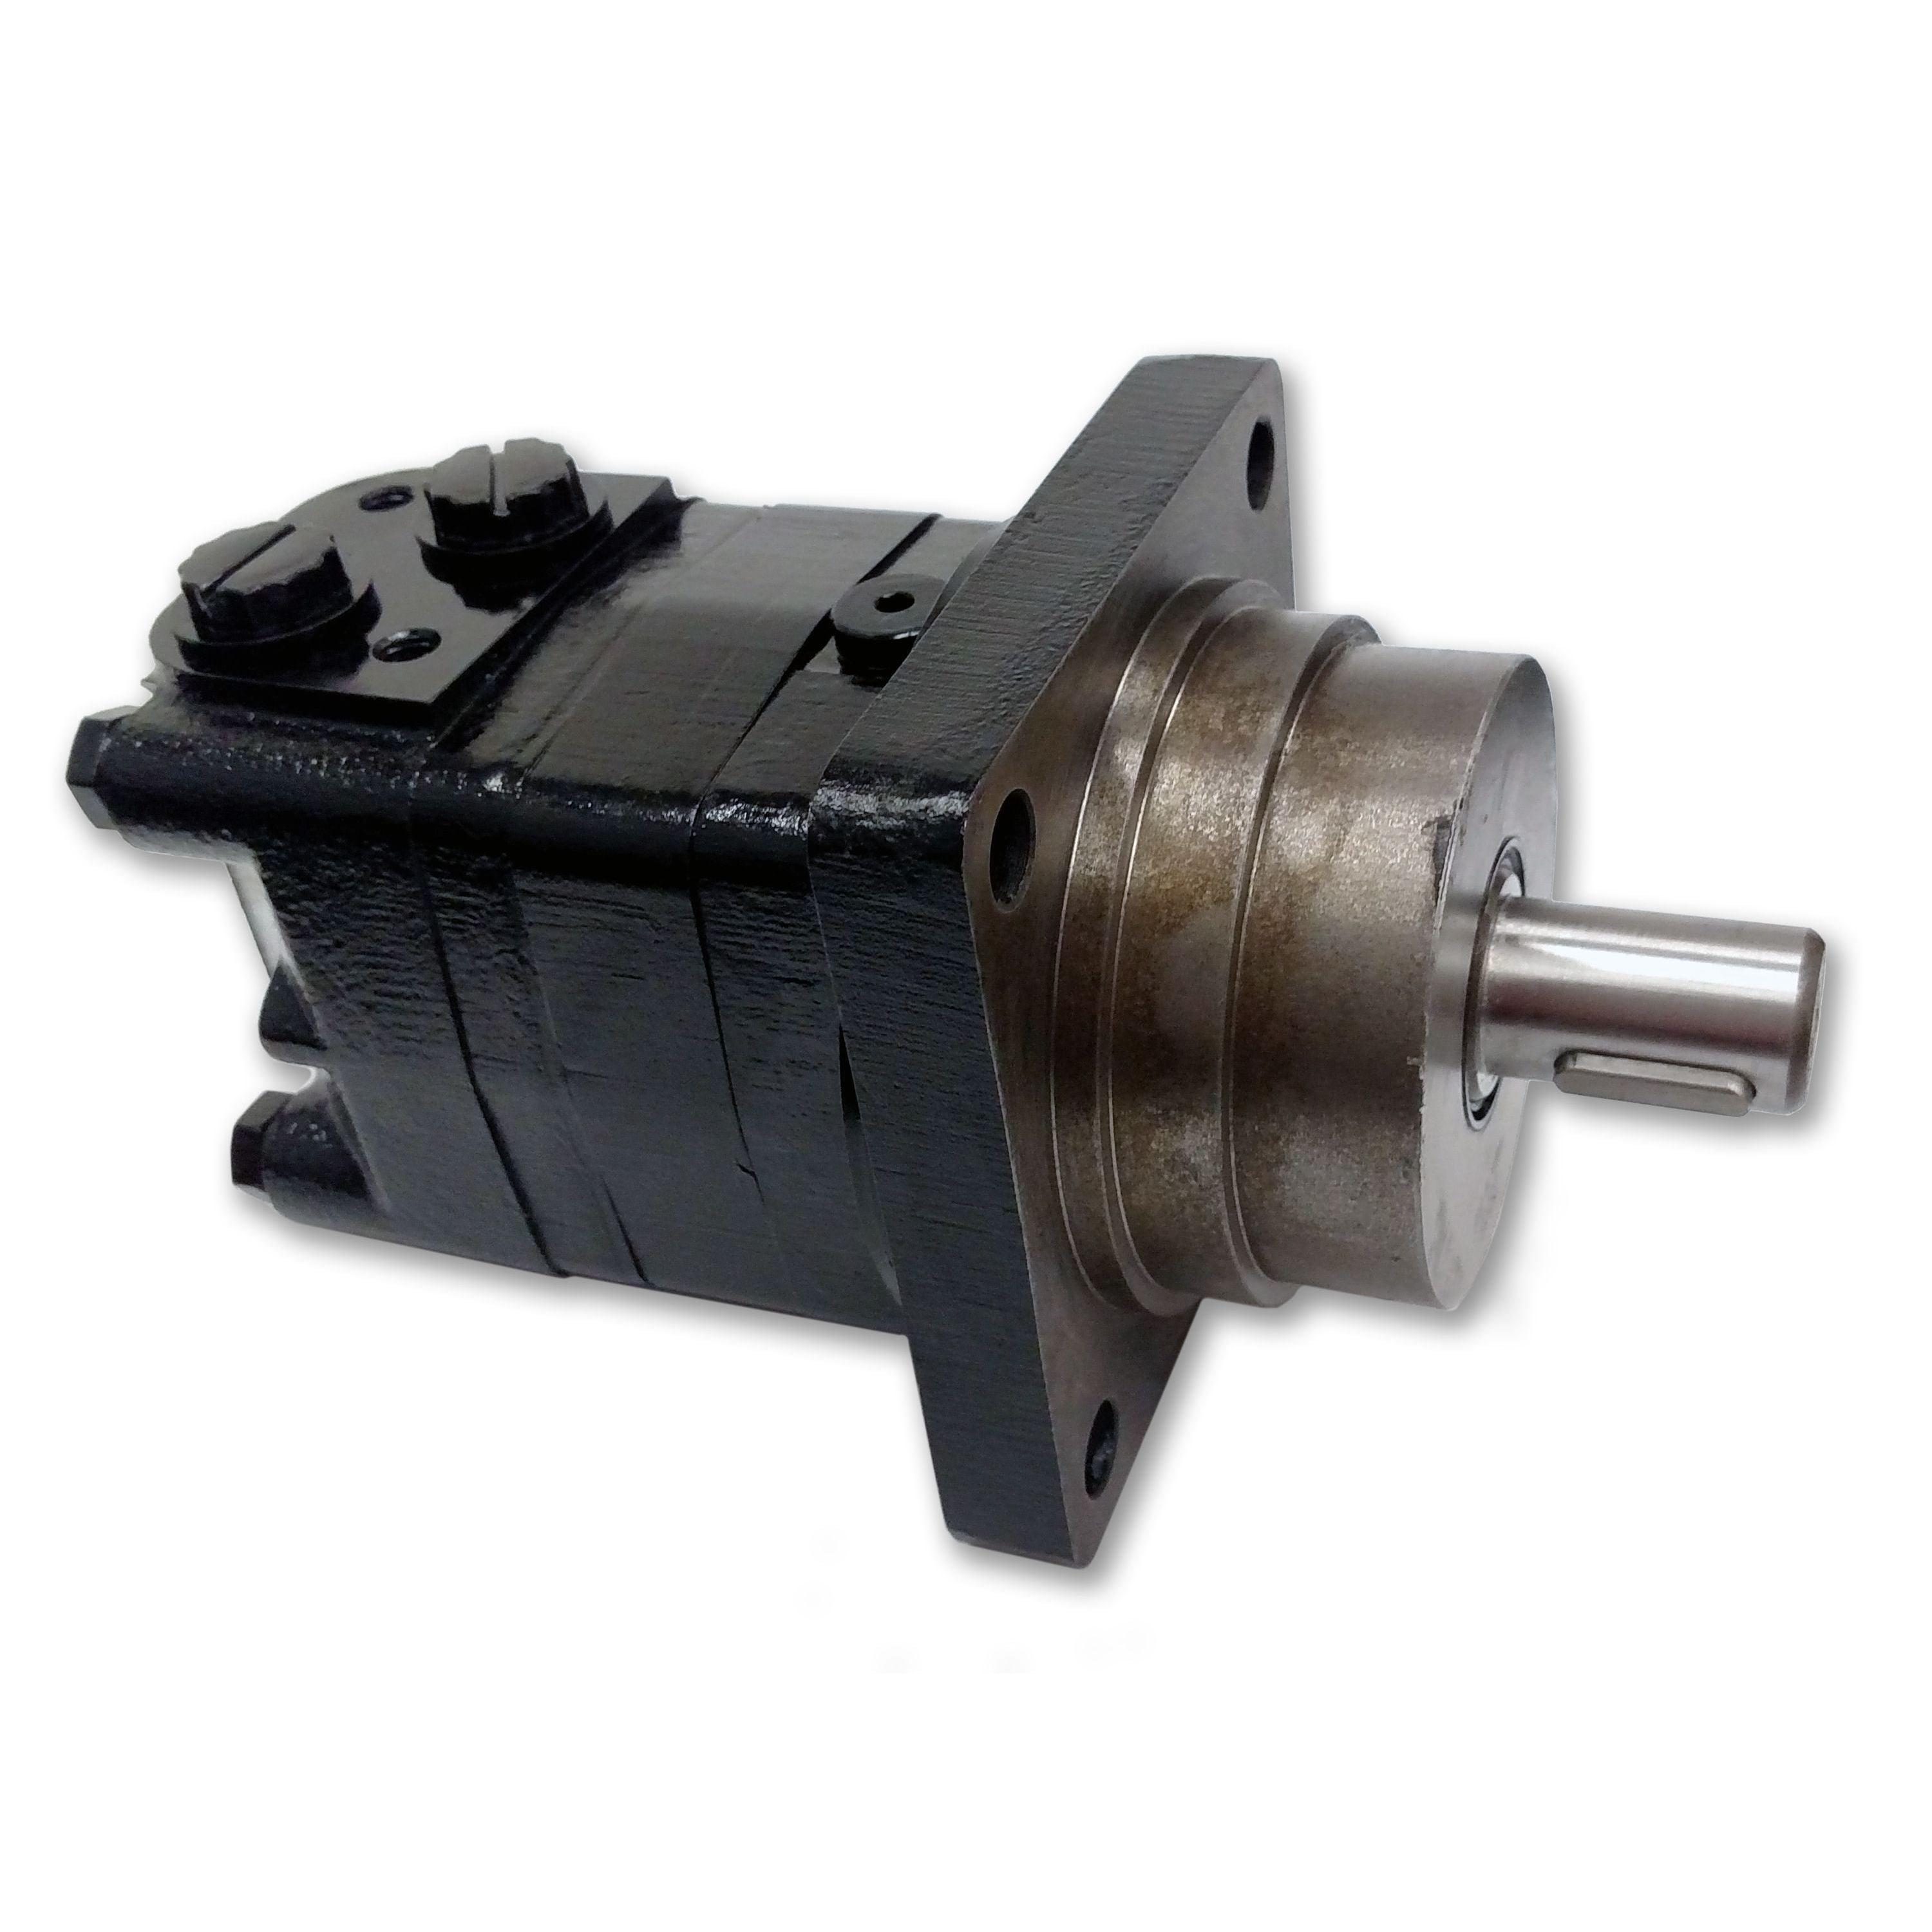 BMSY-475-WE-G-S : Dynamic LSHT Motor, 475cc, 155RPM, 8053in-lb, 2030psi Differential, 19.81GPM, Wheel Mount, 1.25" Bore x 5/16" Key Shaft, Side Ported, #10 SAE (5/8")